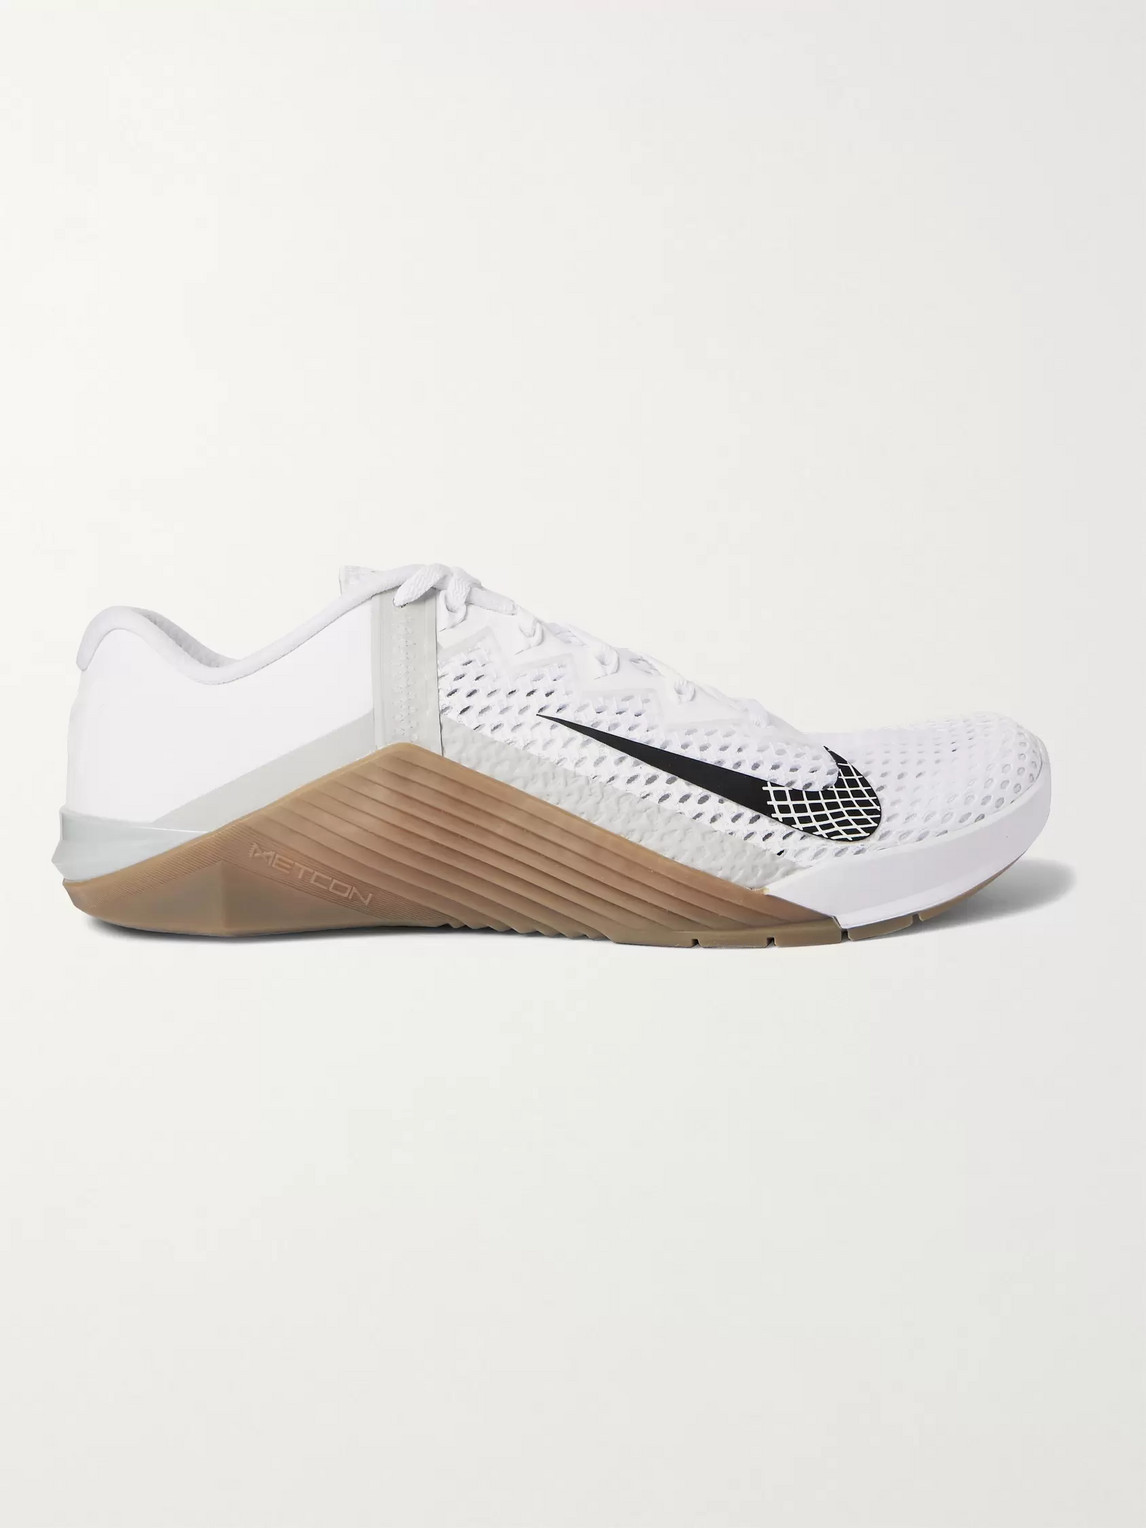 NIKE METCON 6 RUBBER-TRIMMED MESH SNEAKERS